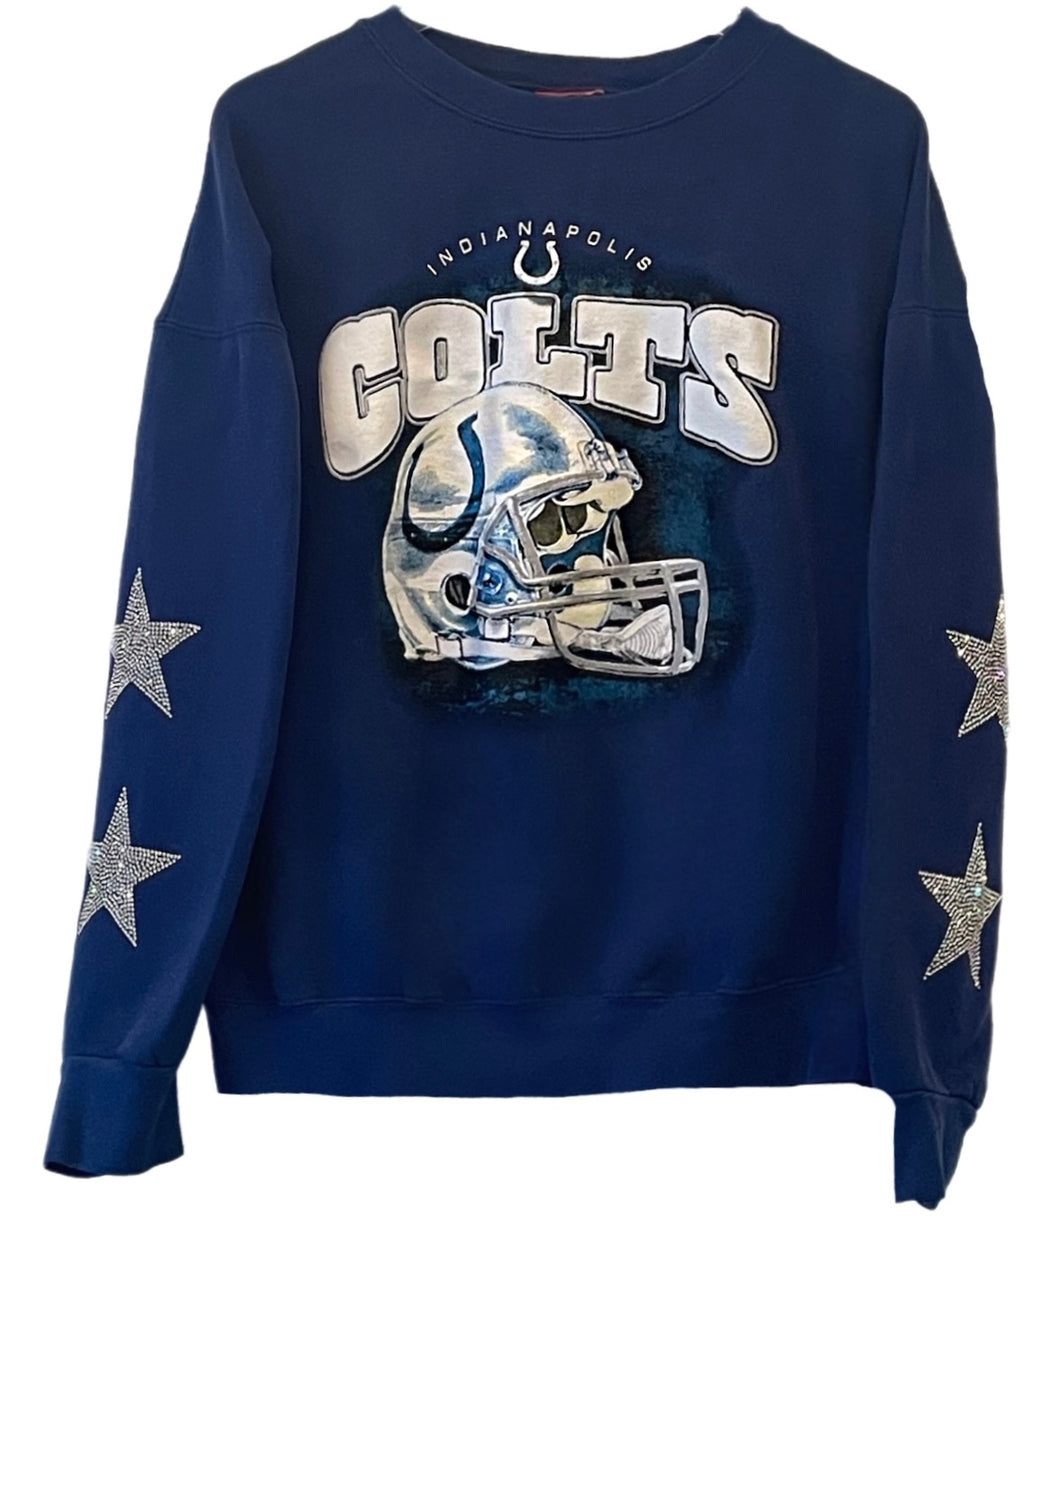 Indianapolis Colts, NFL One of a KIND Vintage Sweatshirt with Crystal Star Design